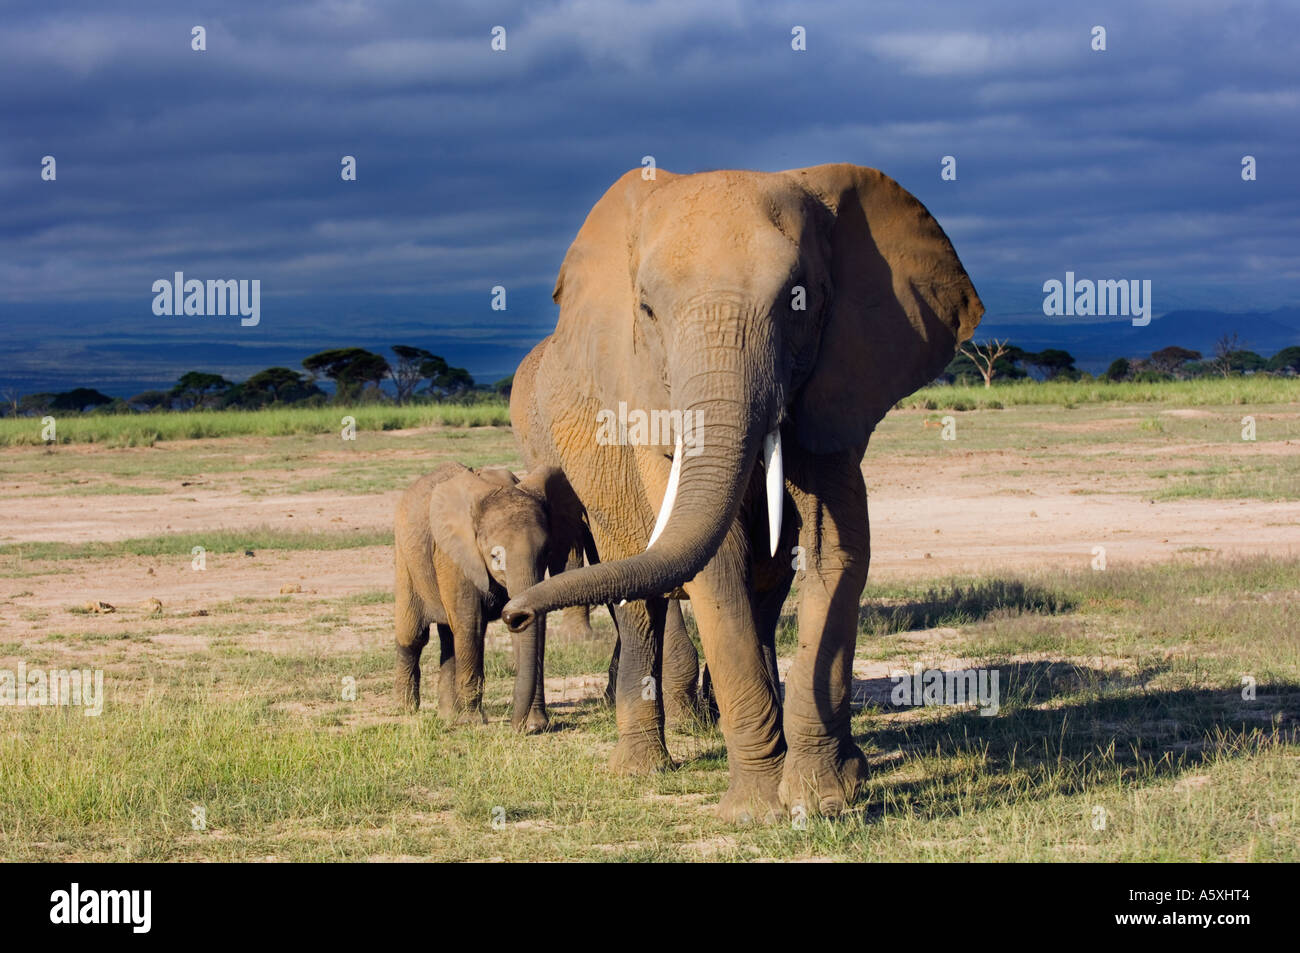 African Elephant Mother and baby against stormy sky Amboseli National Park Kenya Stock Photo